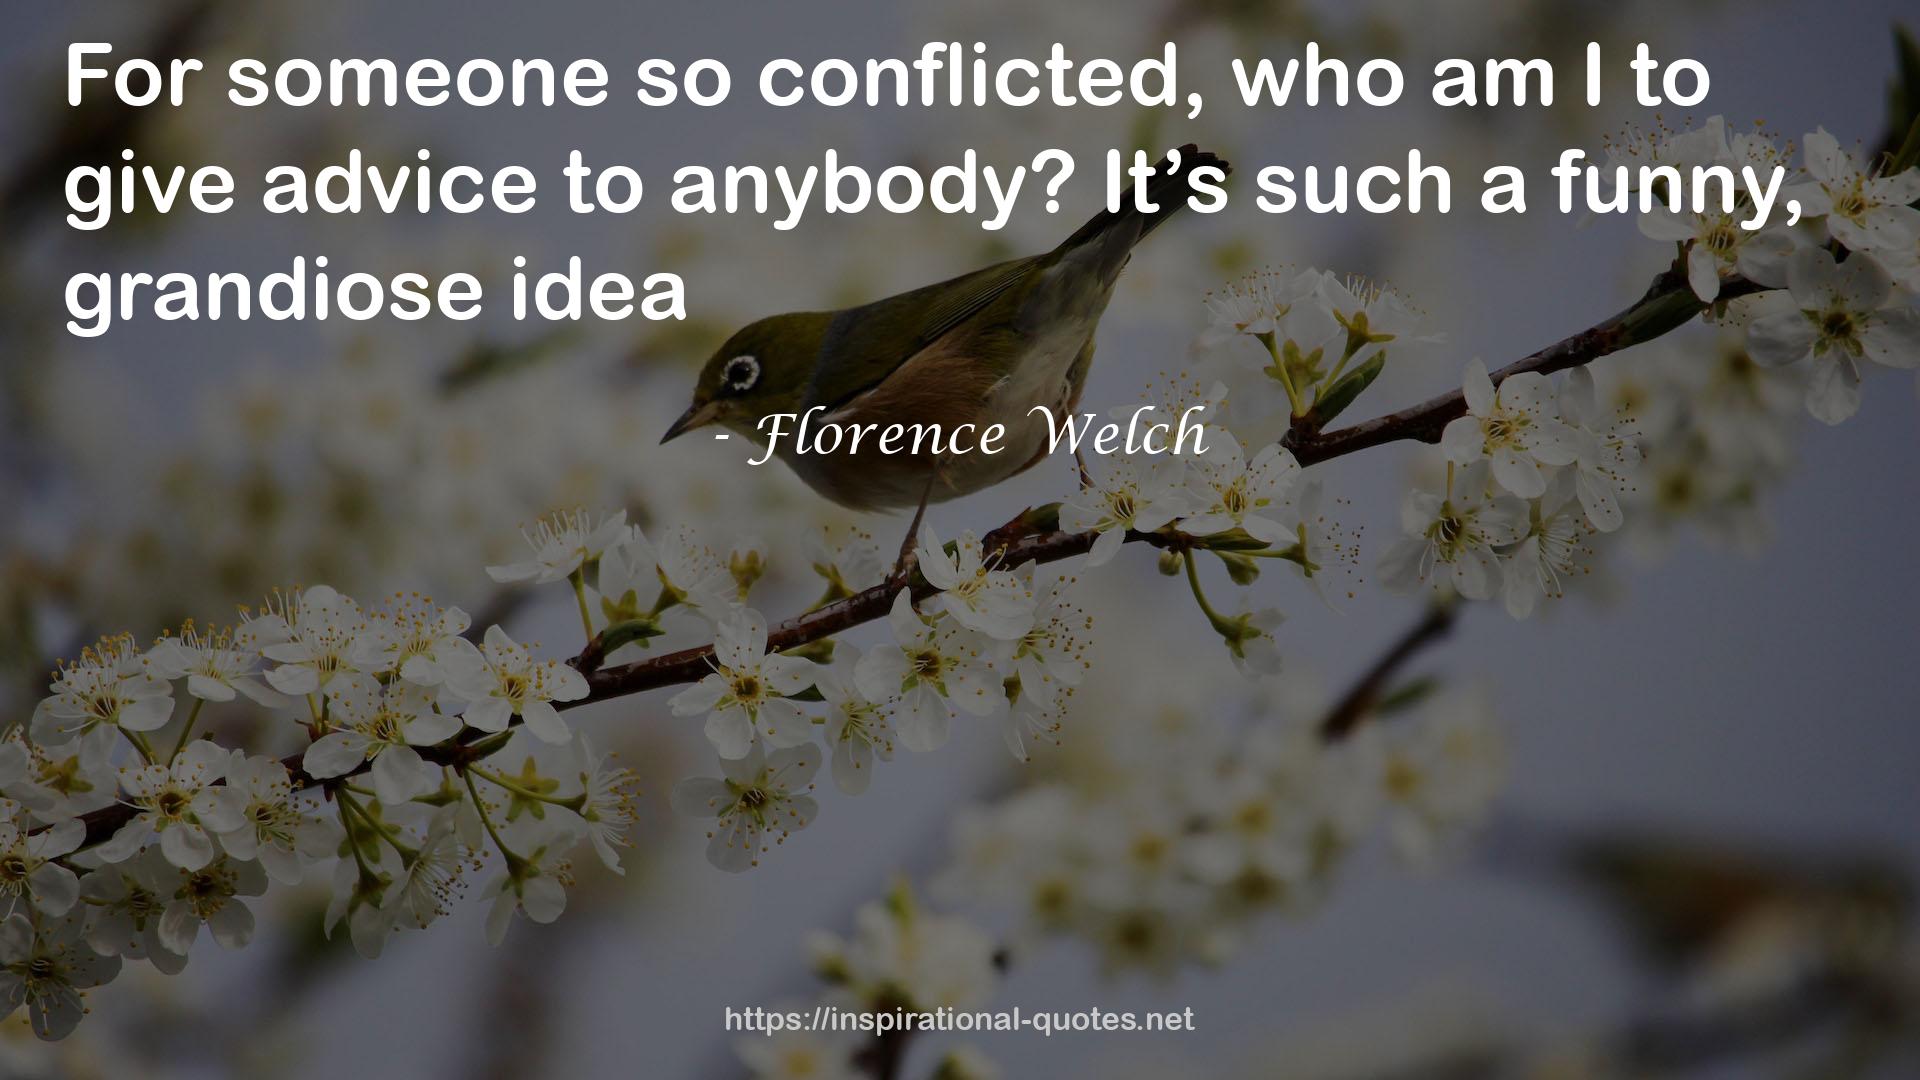 Florence Welch QUOTES